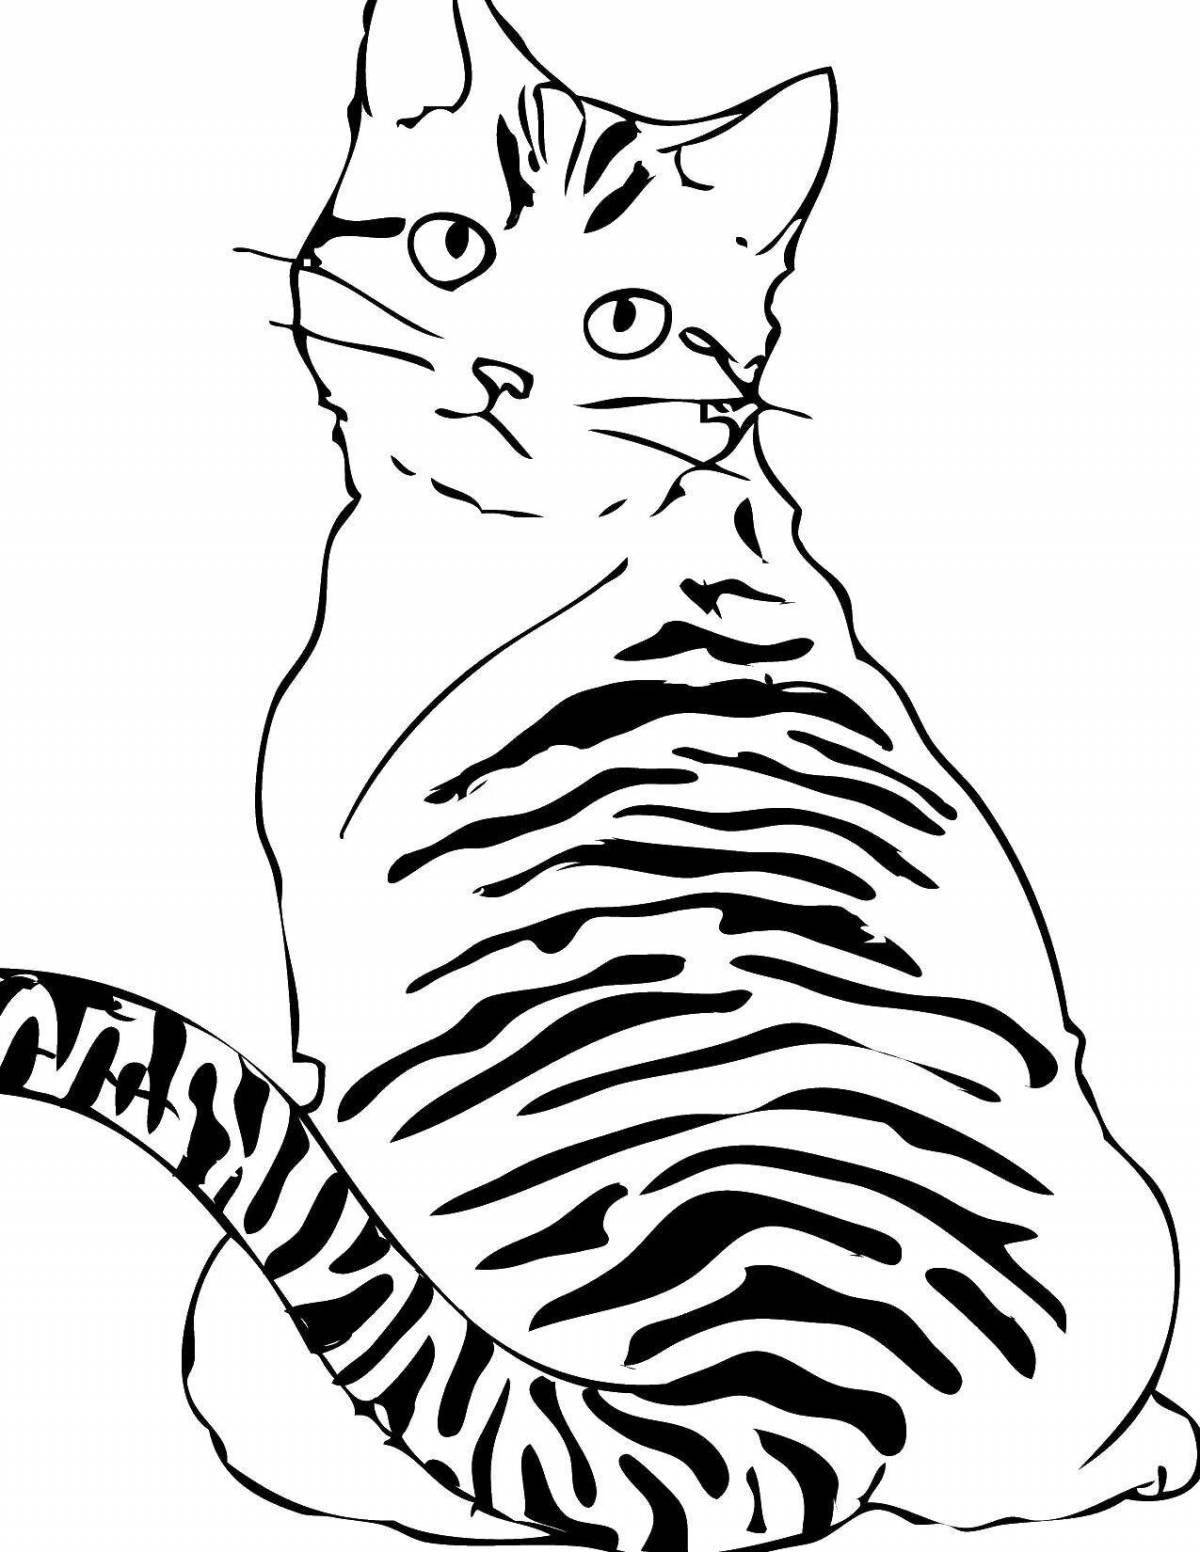 Curious tabby cat coloring book